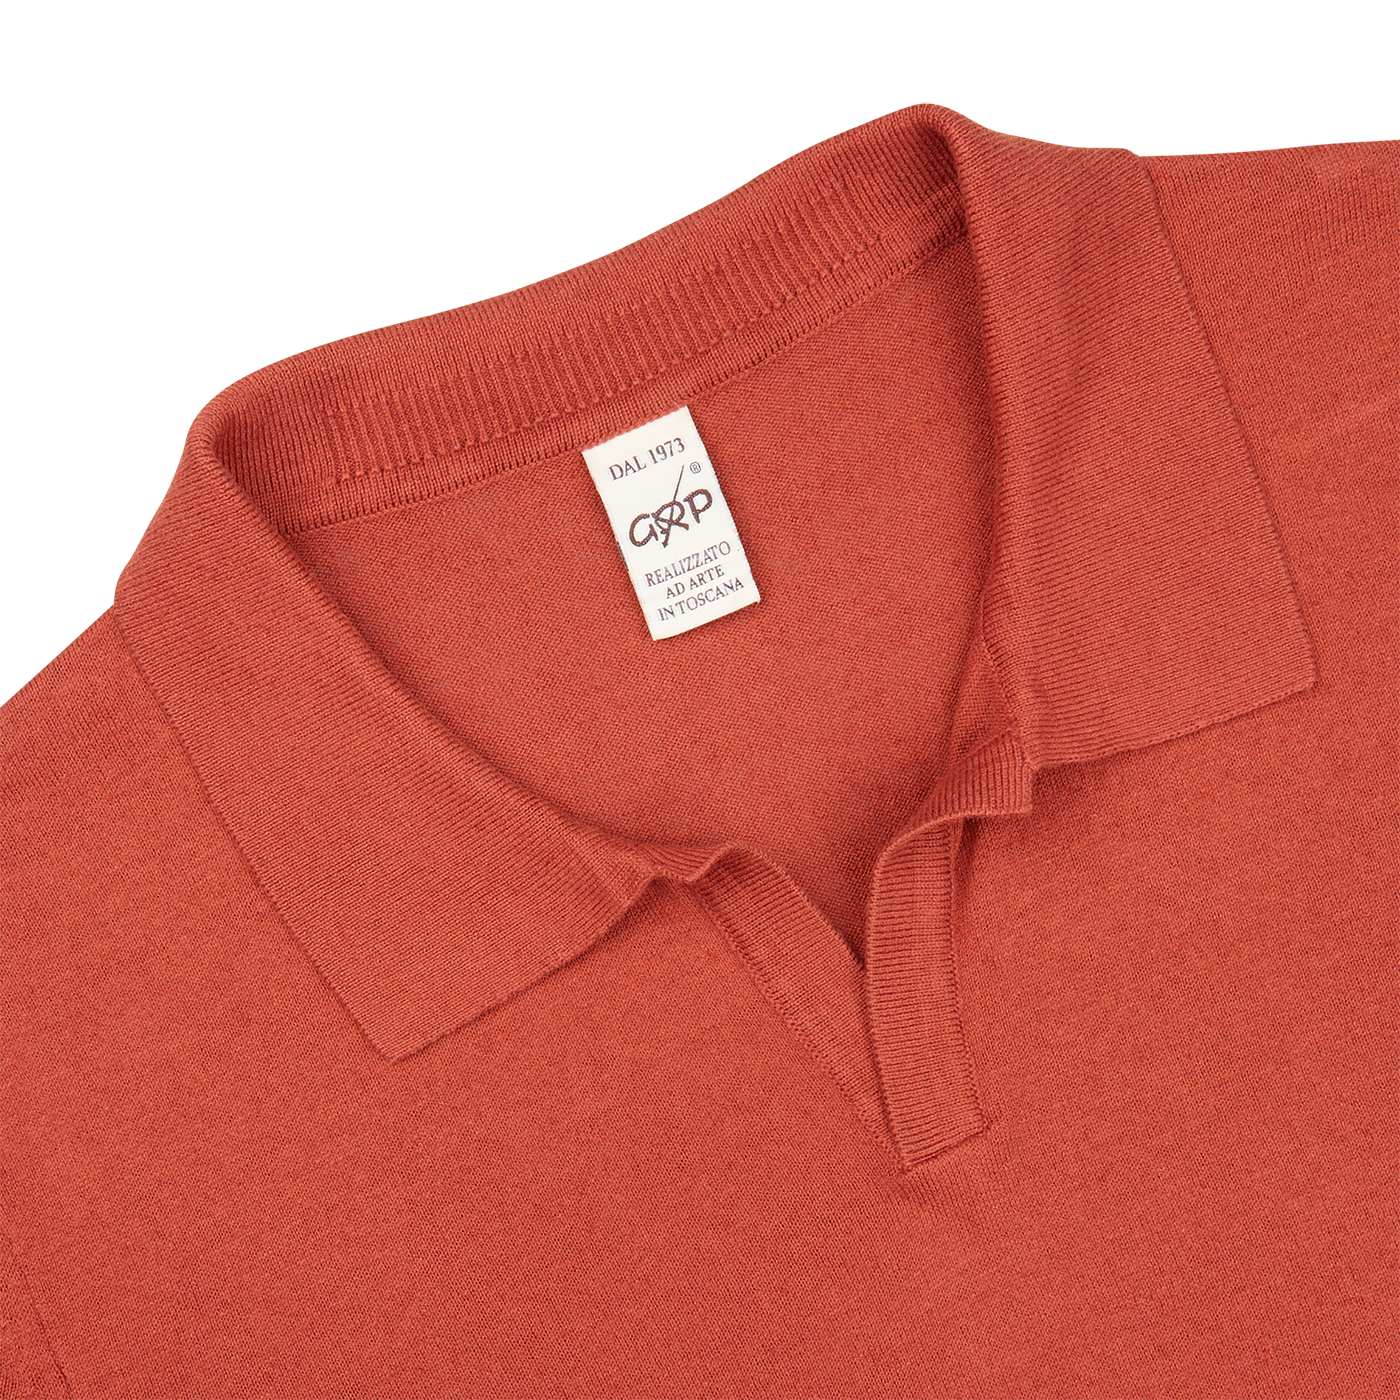 A men's Rust Red Cotton Linen slim fit polo shirt by G.R.P.